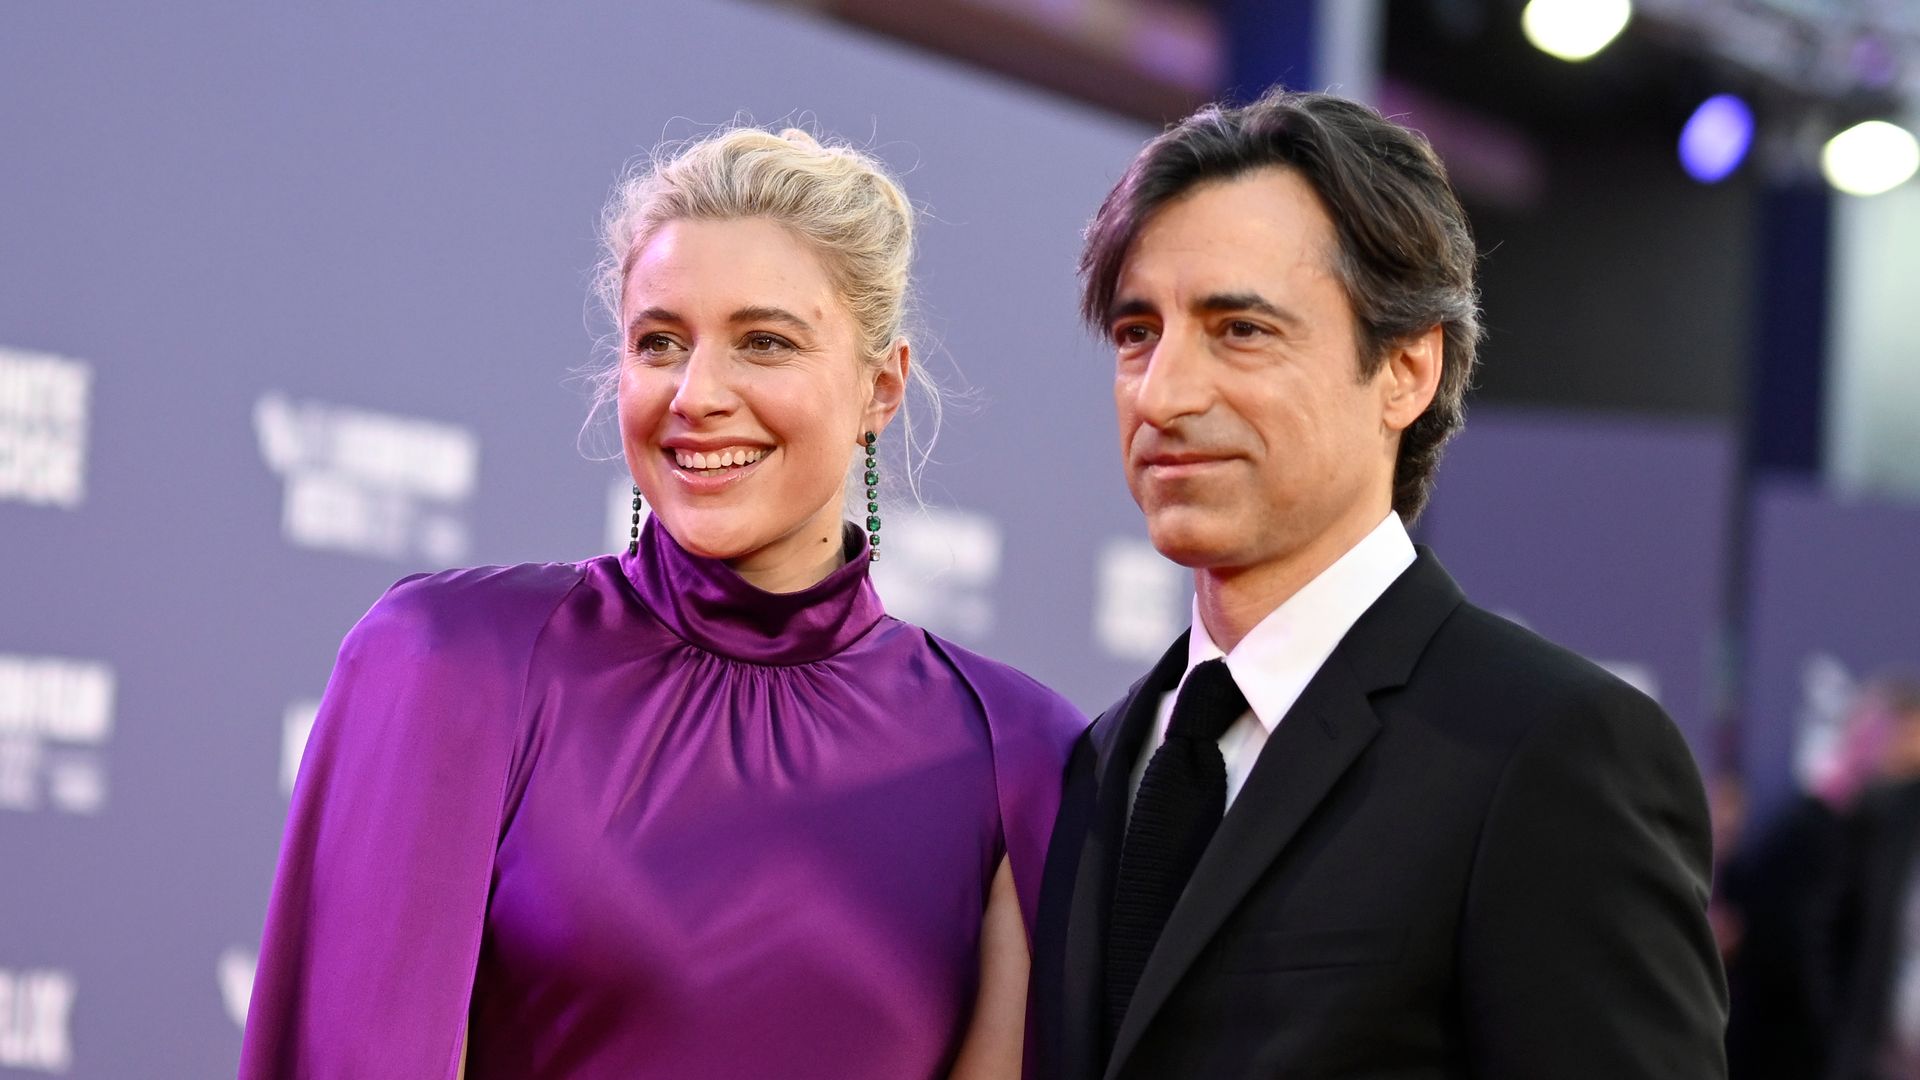 Greta Gerwig and Noah Baumbach attend the "White Noise" UK premiere during the 66th BFI London Film Festival at The Royal Festival Hall on October 06, 2022 in London, England